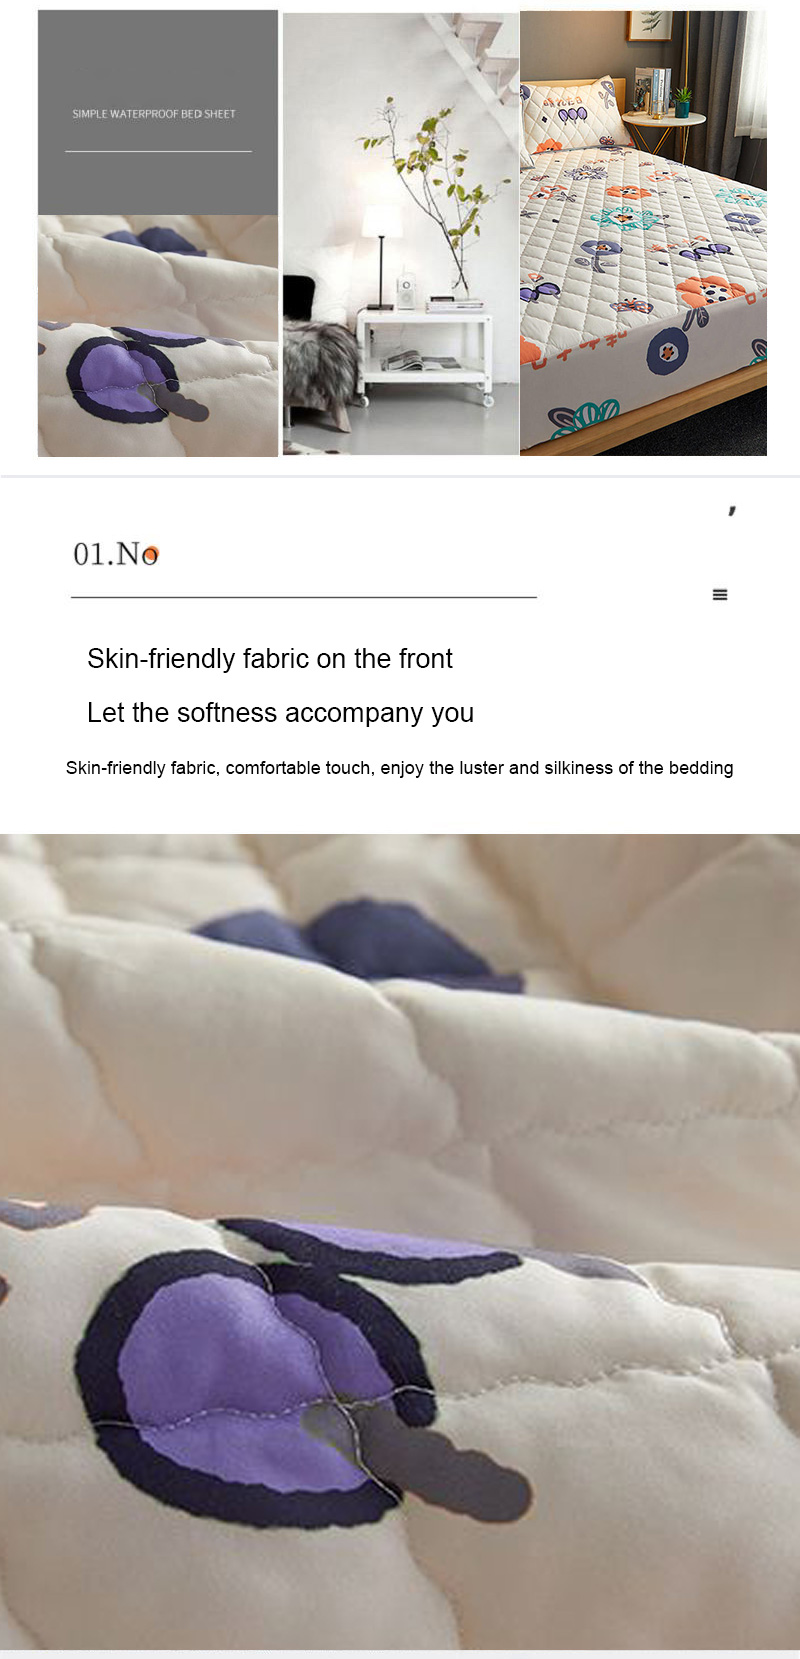 Waterproof Terry Cover Mattress Pad